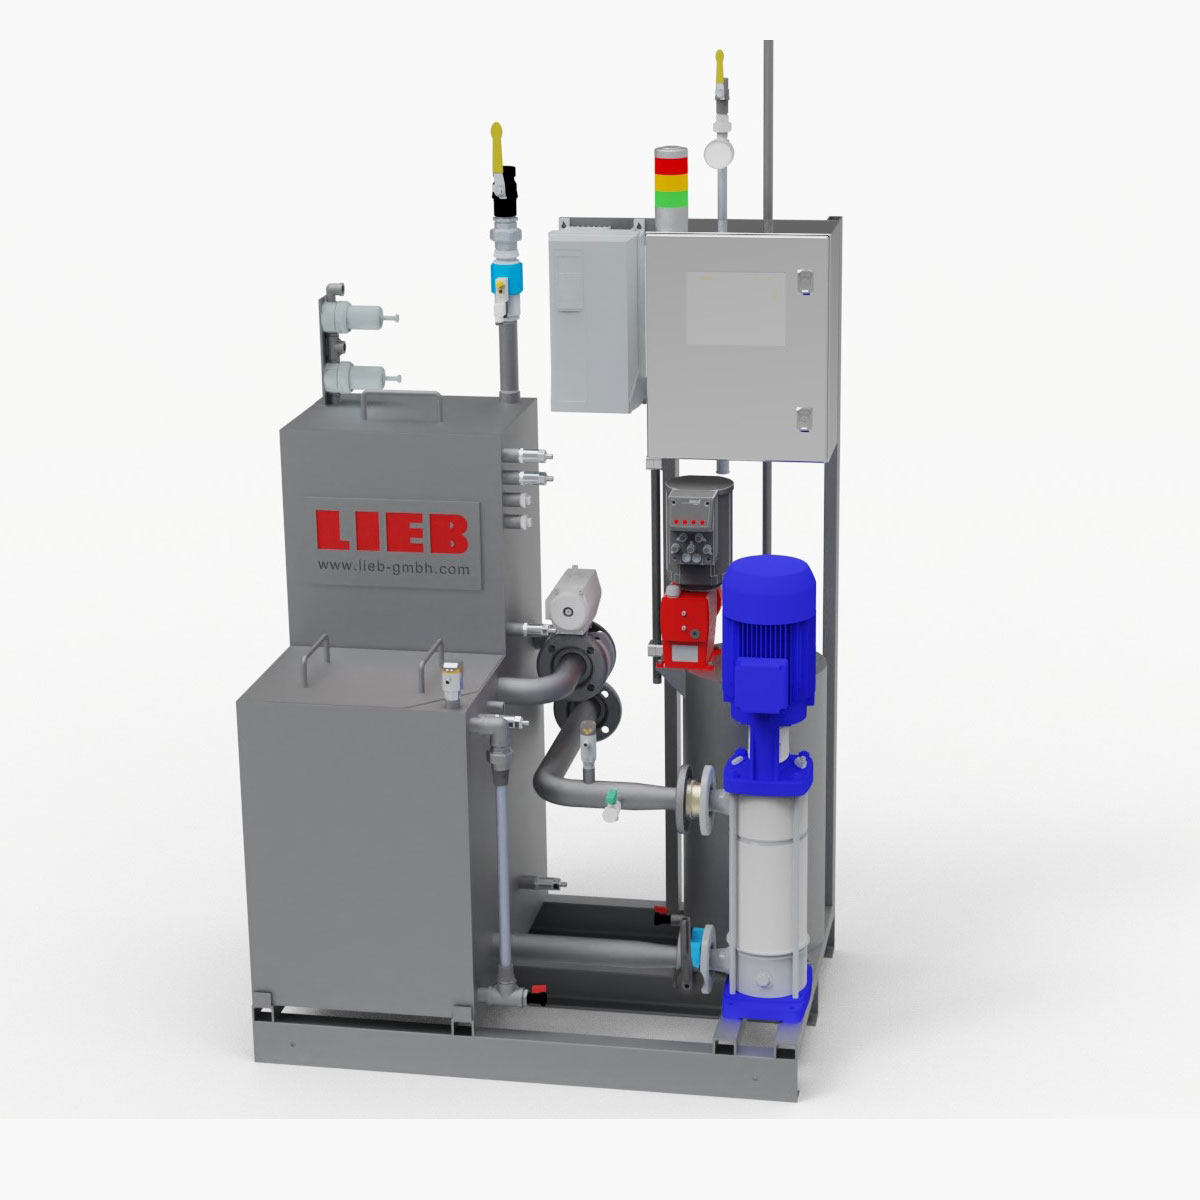 Stationary release agent mixing station (delivery rate: 30 l/min)